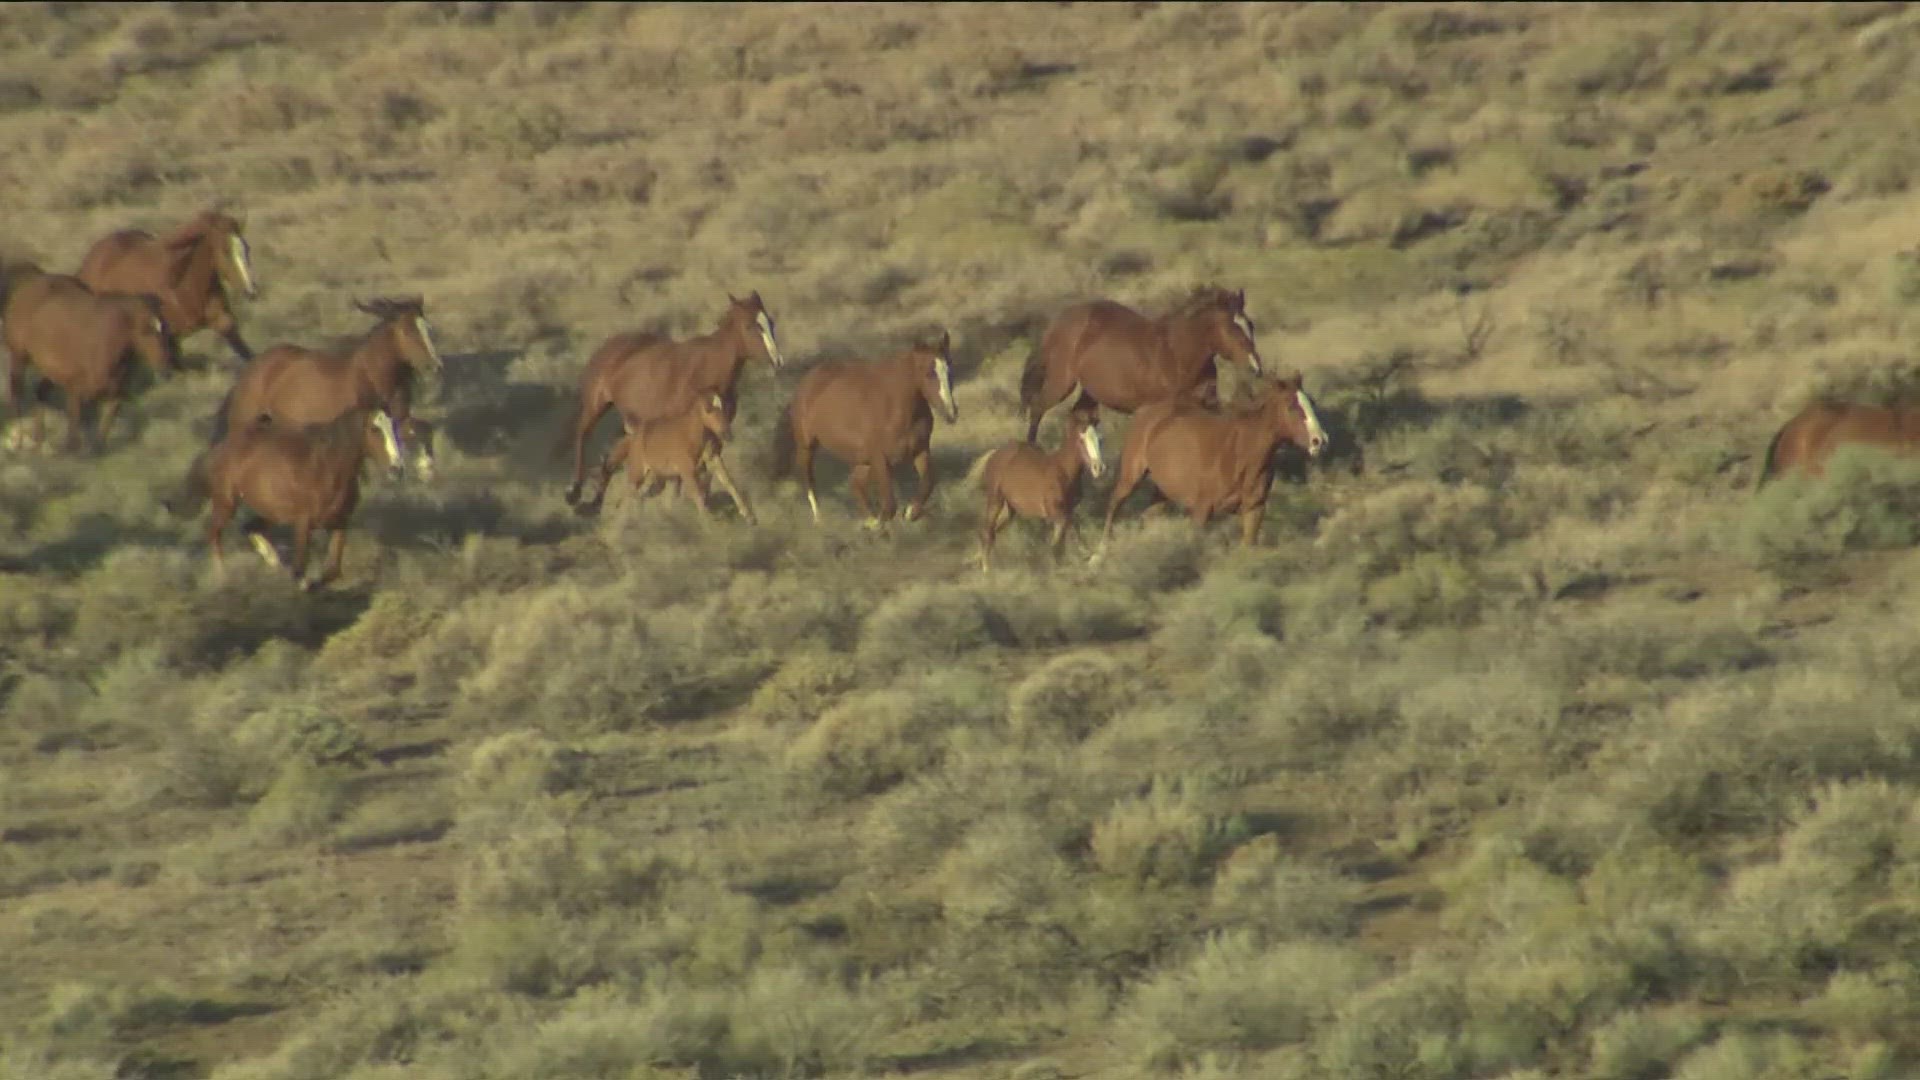 More than 100 horses, gathered by the BLM on the Owyhee Front, are up for adoption. The event is part of a program to manage healthy herd numbers.